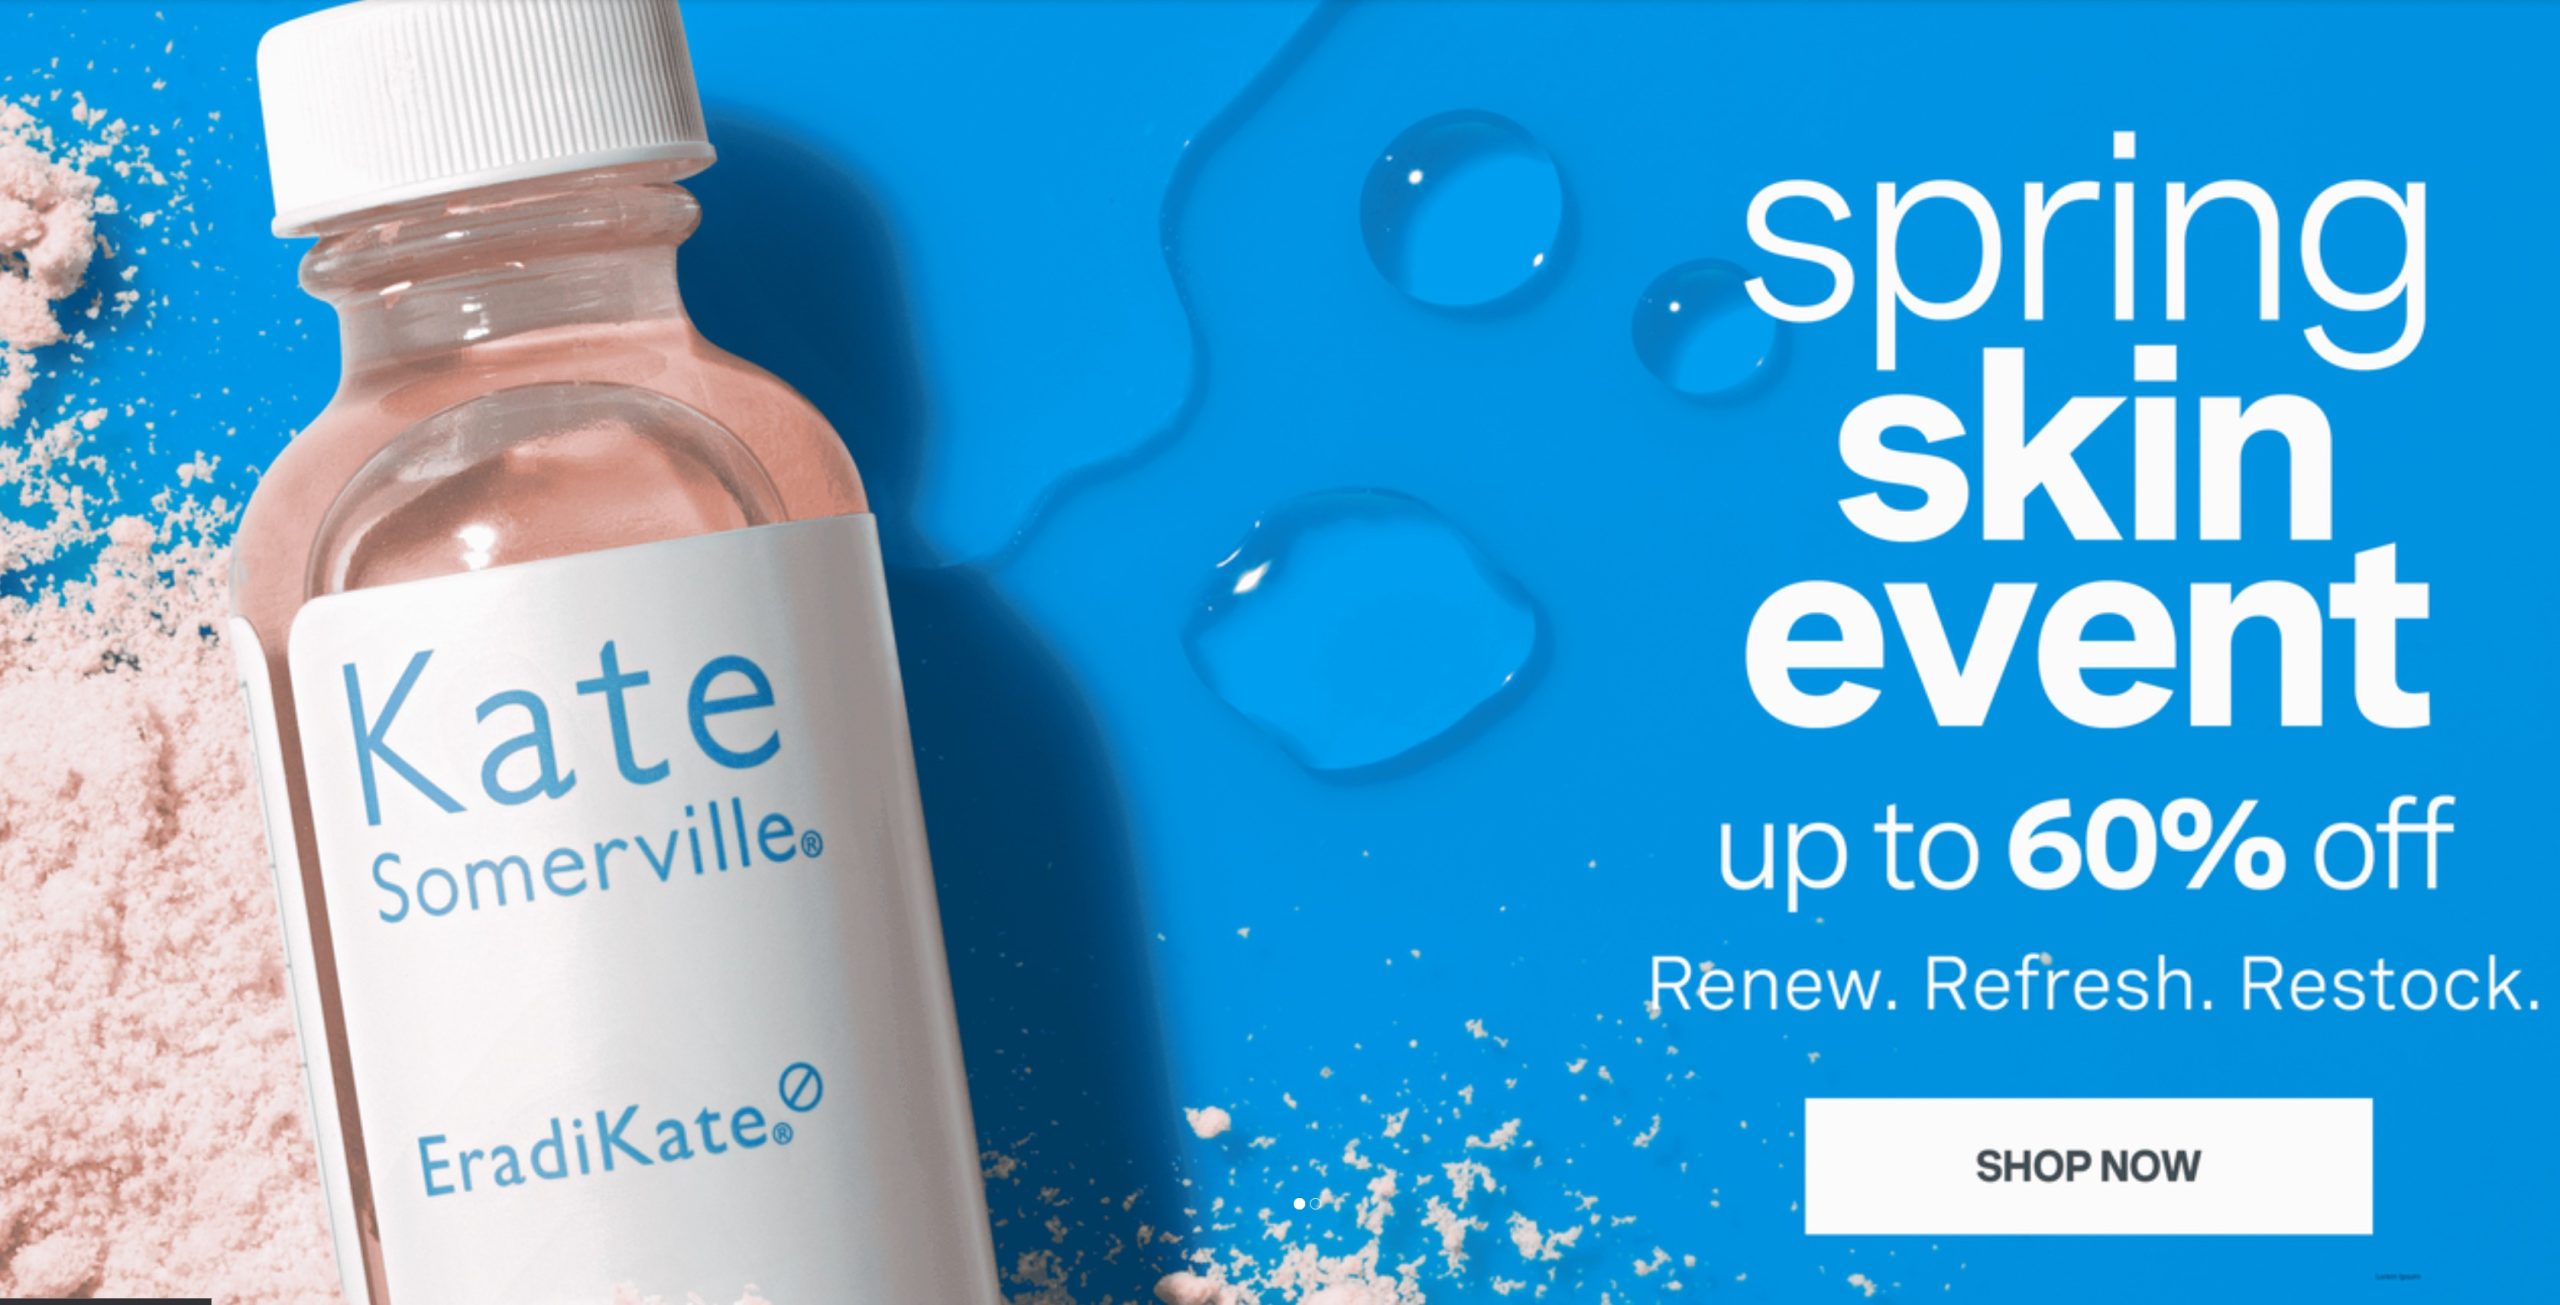 Up to 60% off select skincare at Kate Somerville